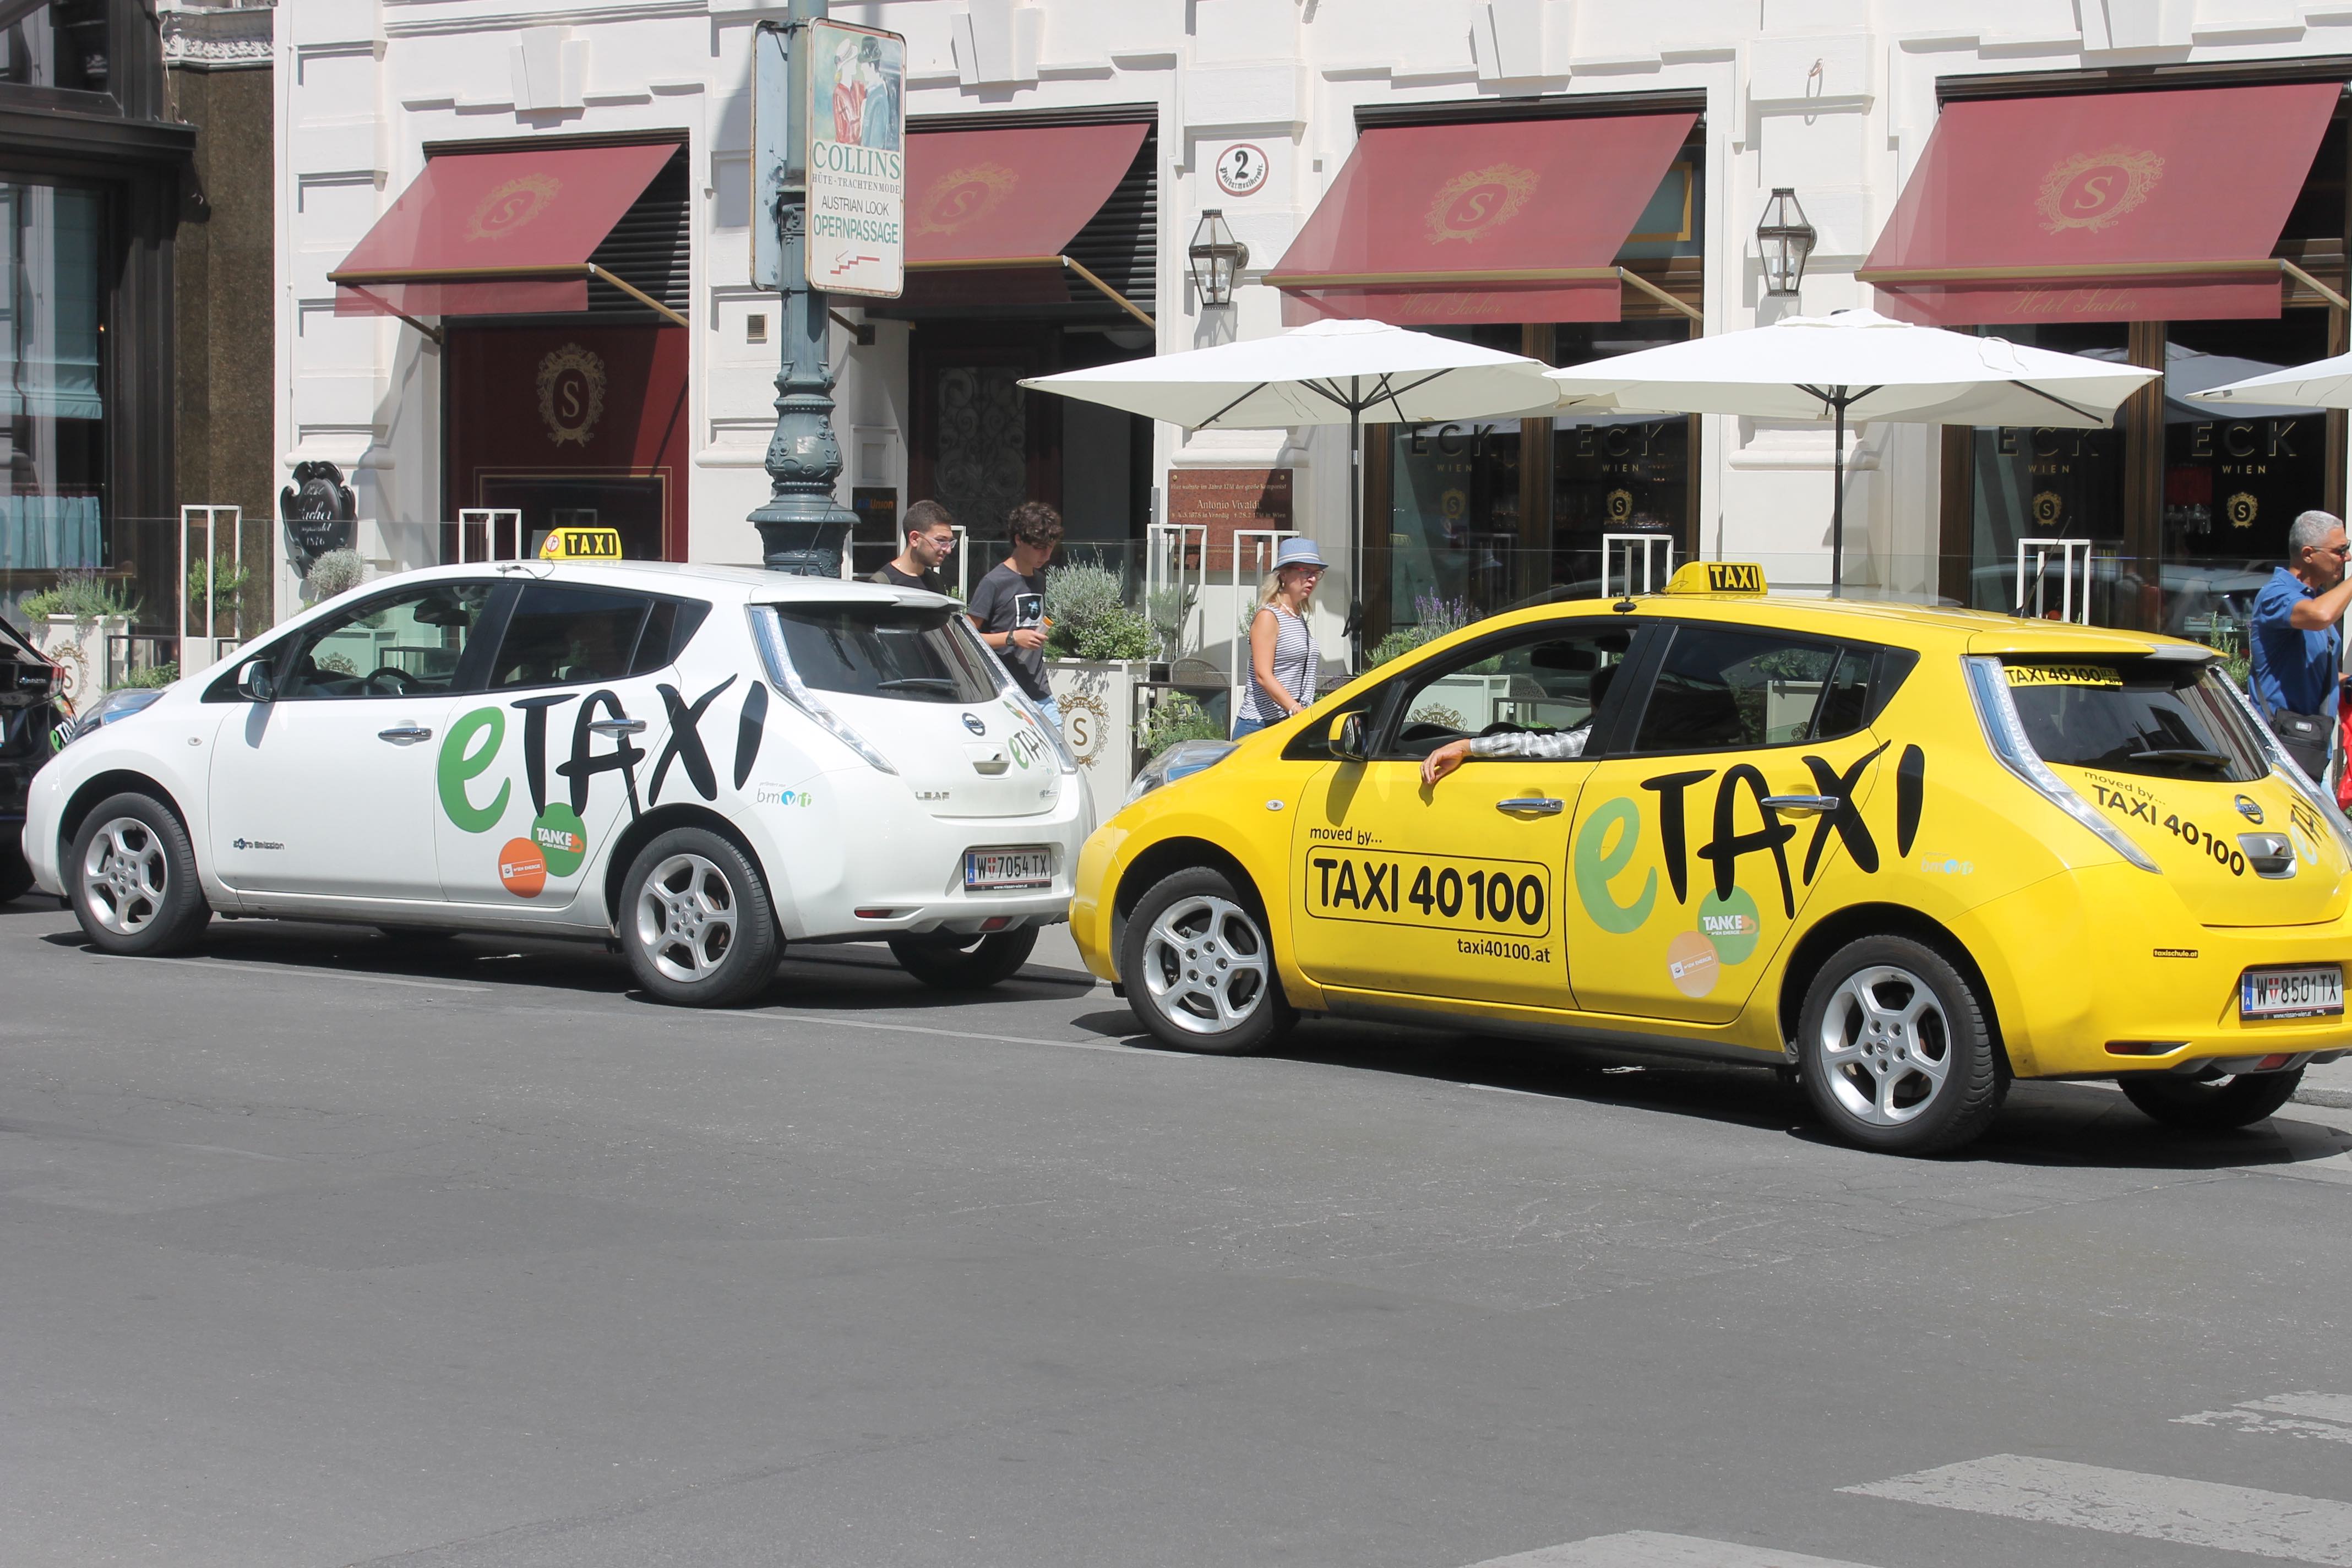 Blog: Mobility in Vienna goes much further than e-Taxi…